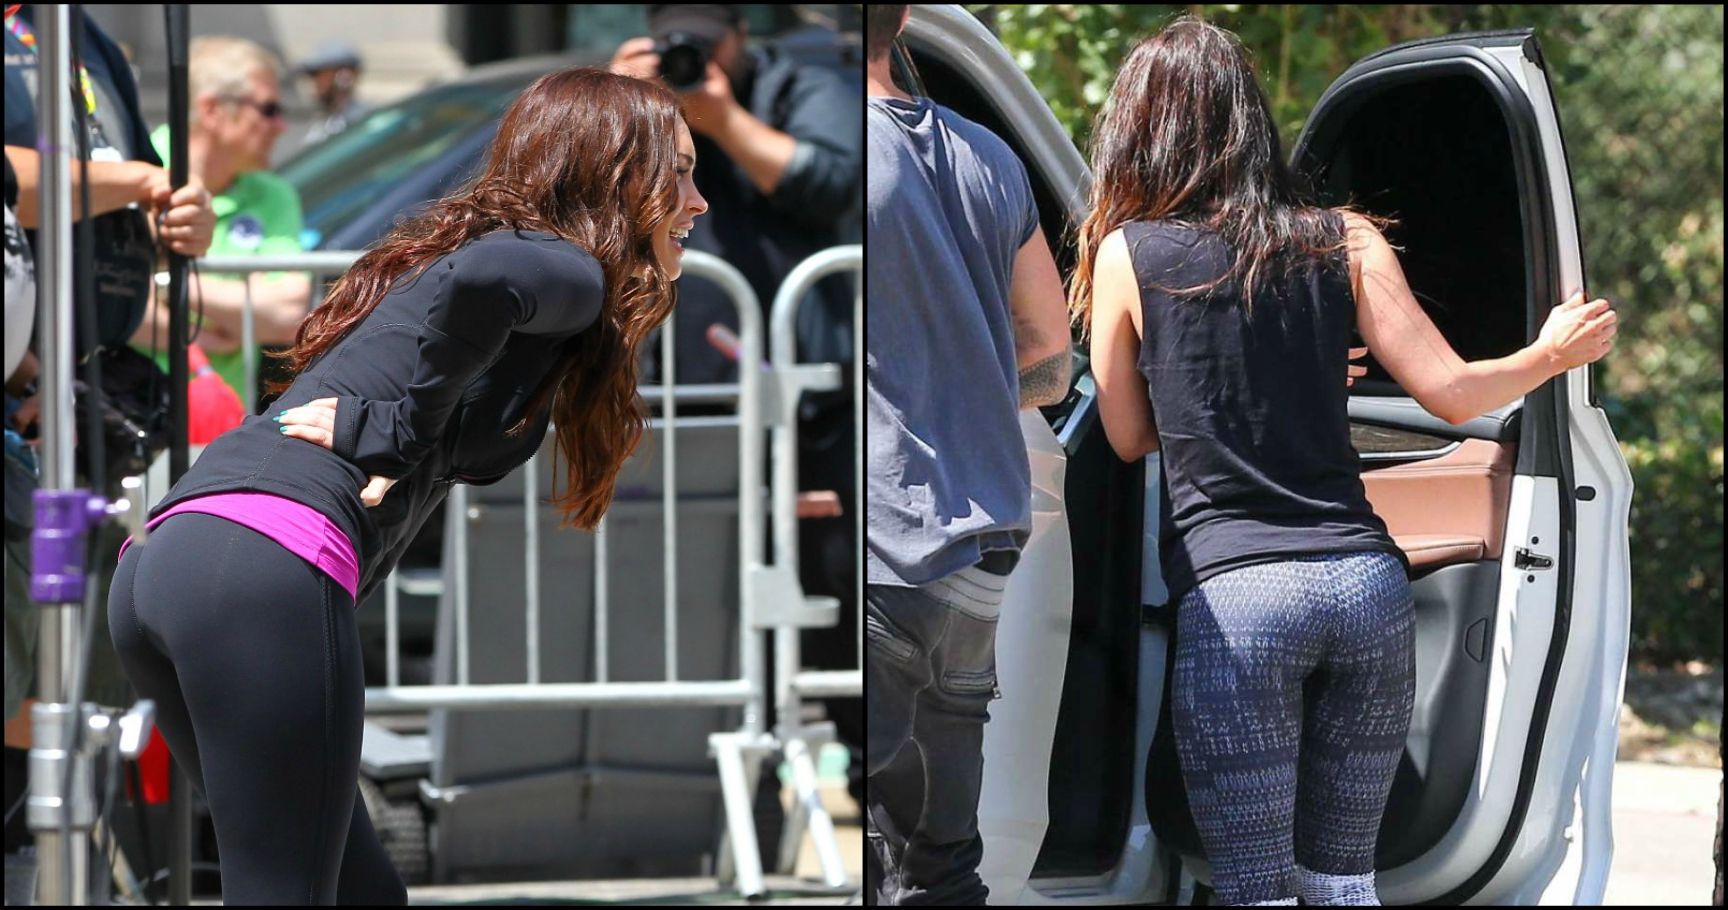 15 Hottest Photos of Megan Fox in Yoga Pants TheRichest.